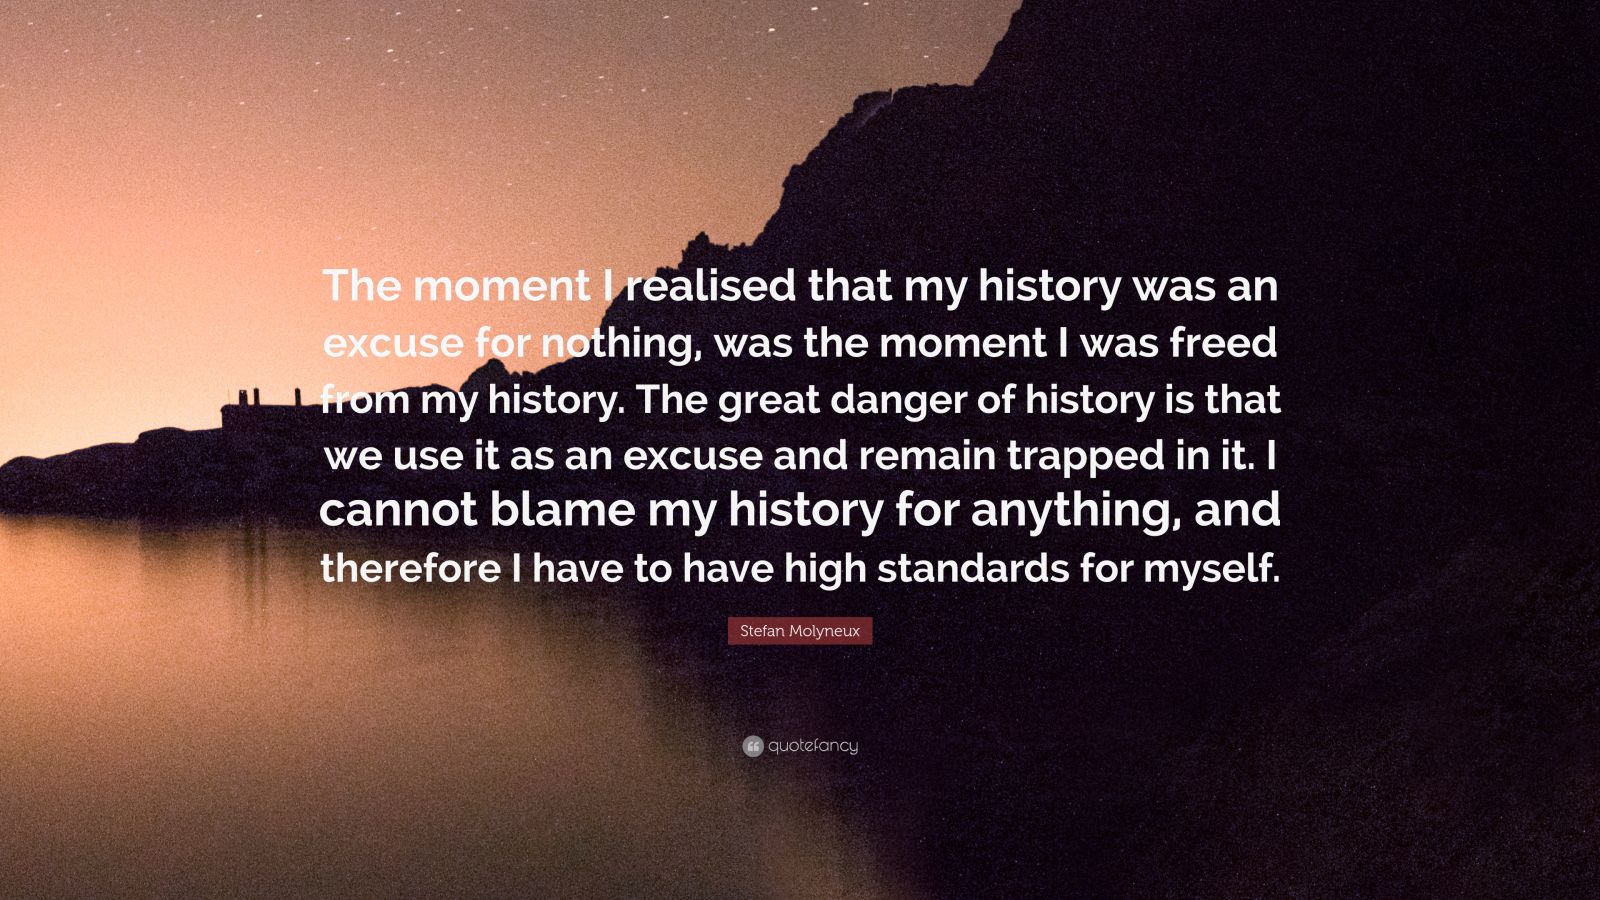 Stefan Molyneux Quote: "The moment I realised that my history was an excuse for nothing, was the ...